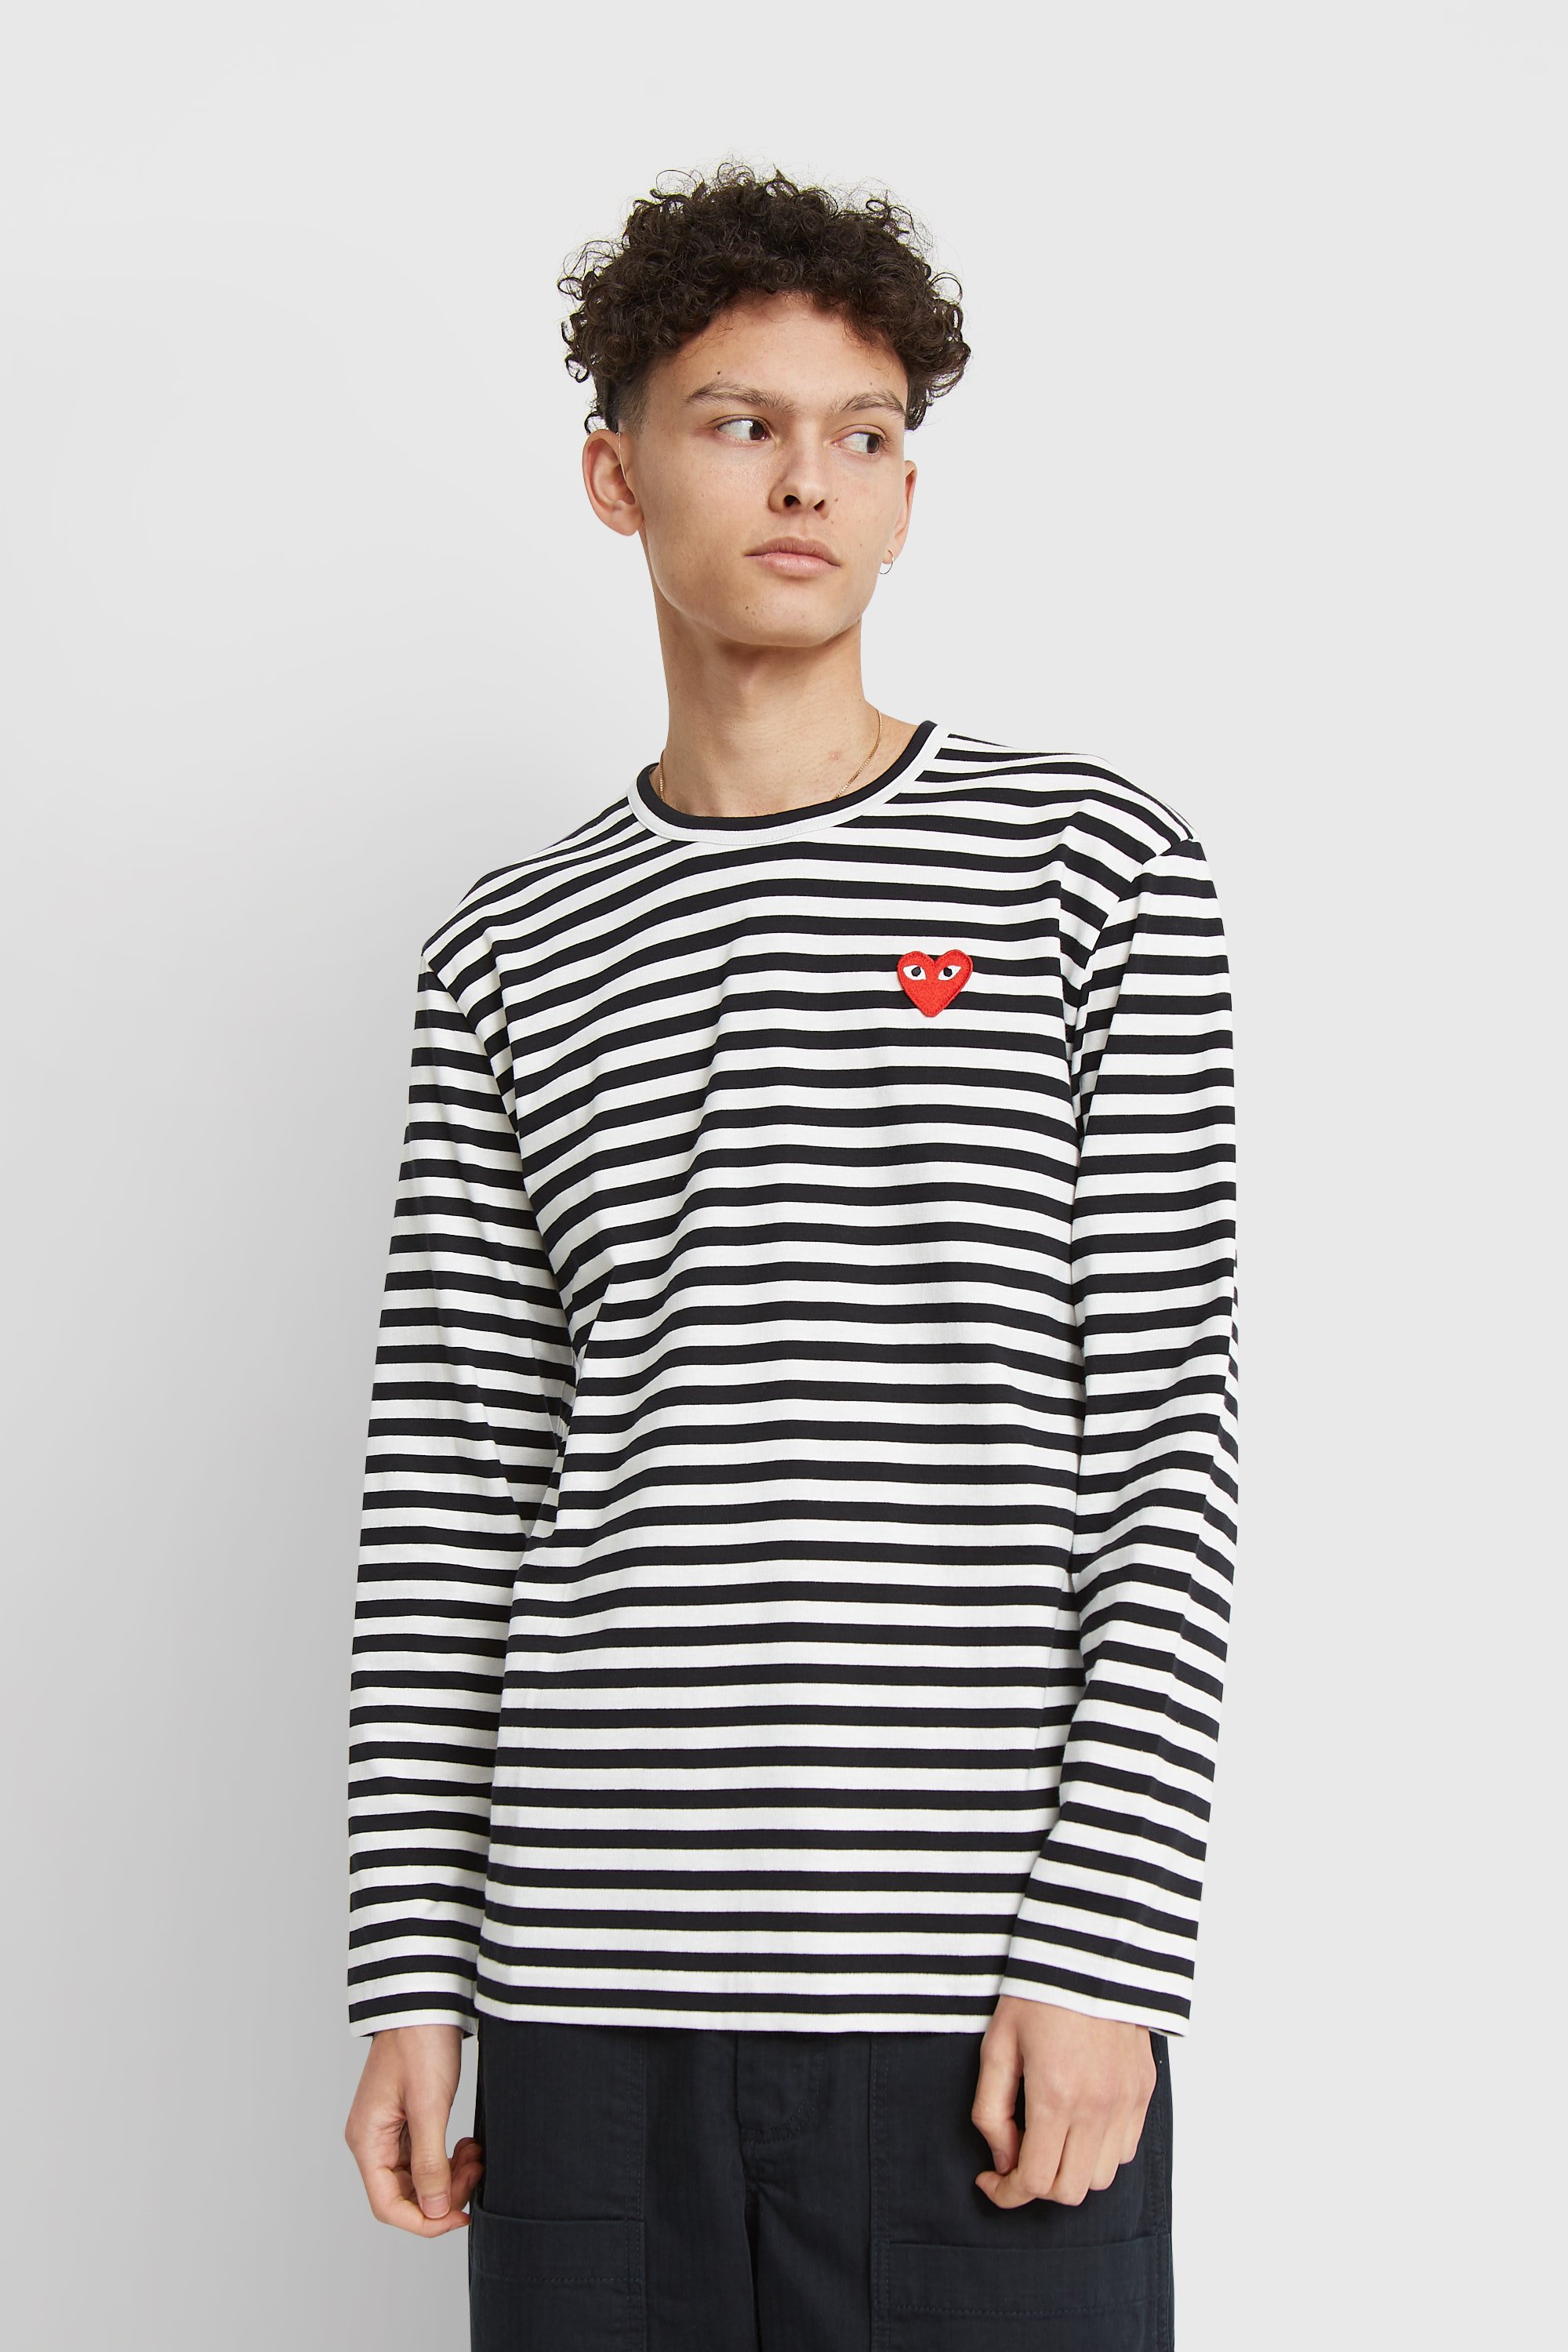 red and white striped shirt mens long sleeve